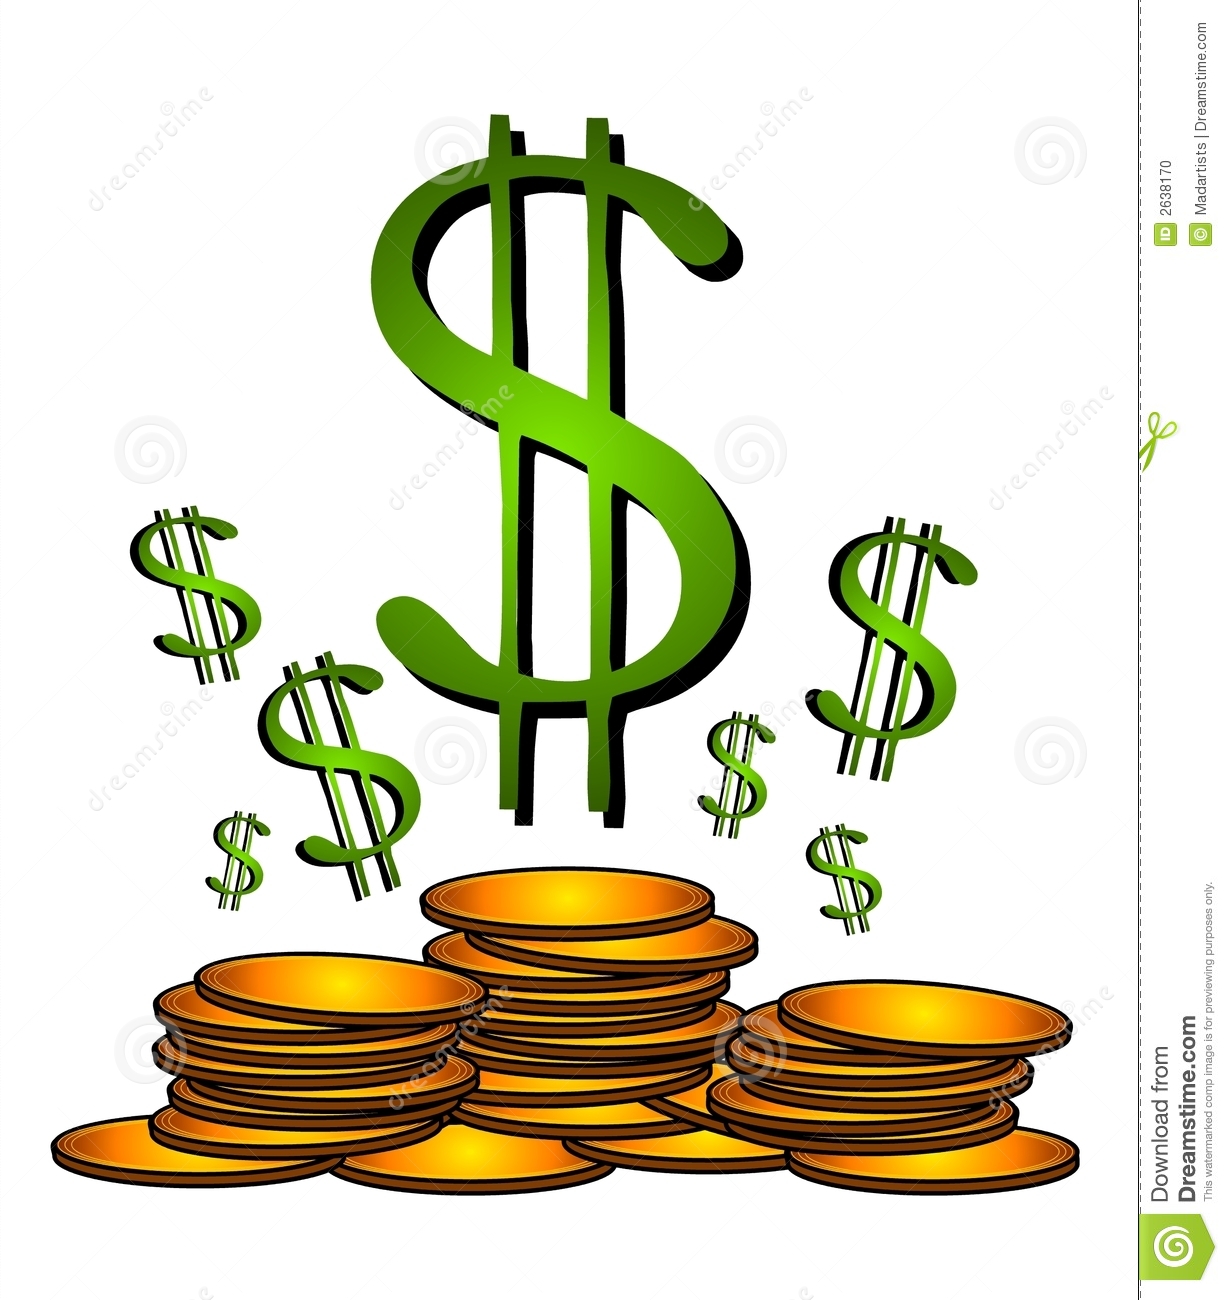 An Illustration Of Gold Money Coins And Dollar Signs Representing